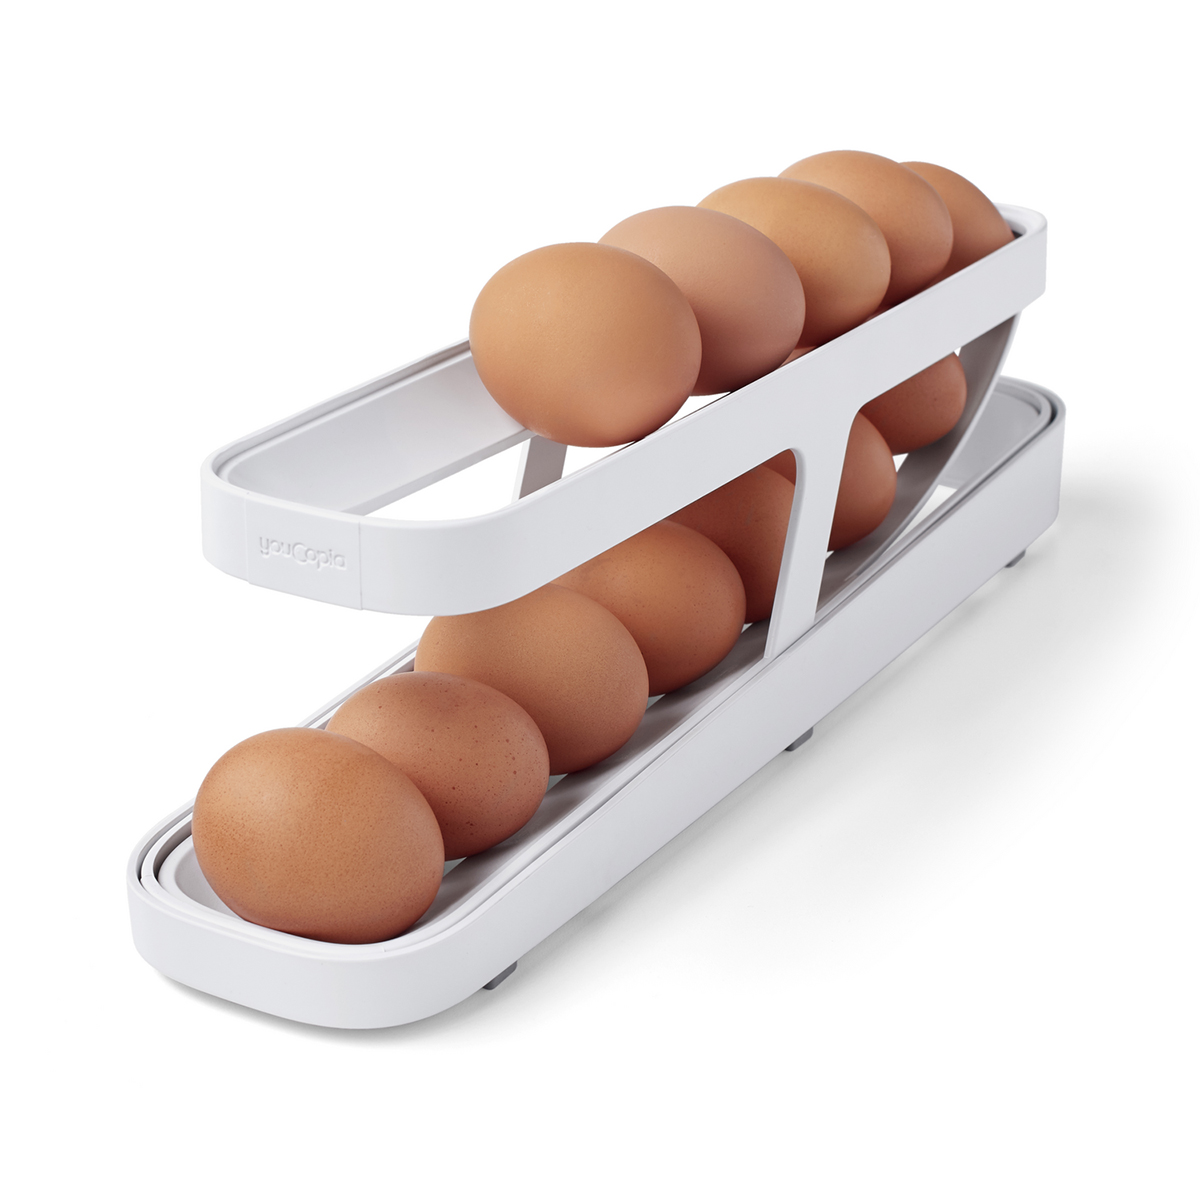 https://www.containerstore.com/catalogimages/481053/10093349-youcopia-rolldown-egg-dispe.jpg